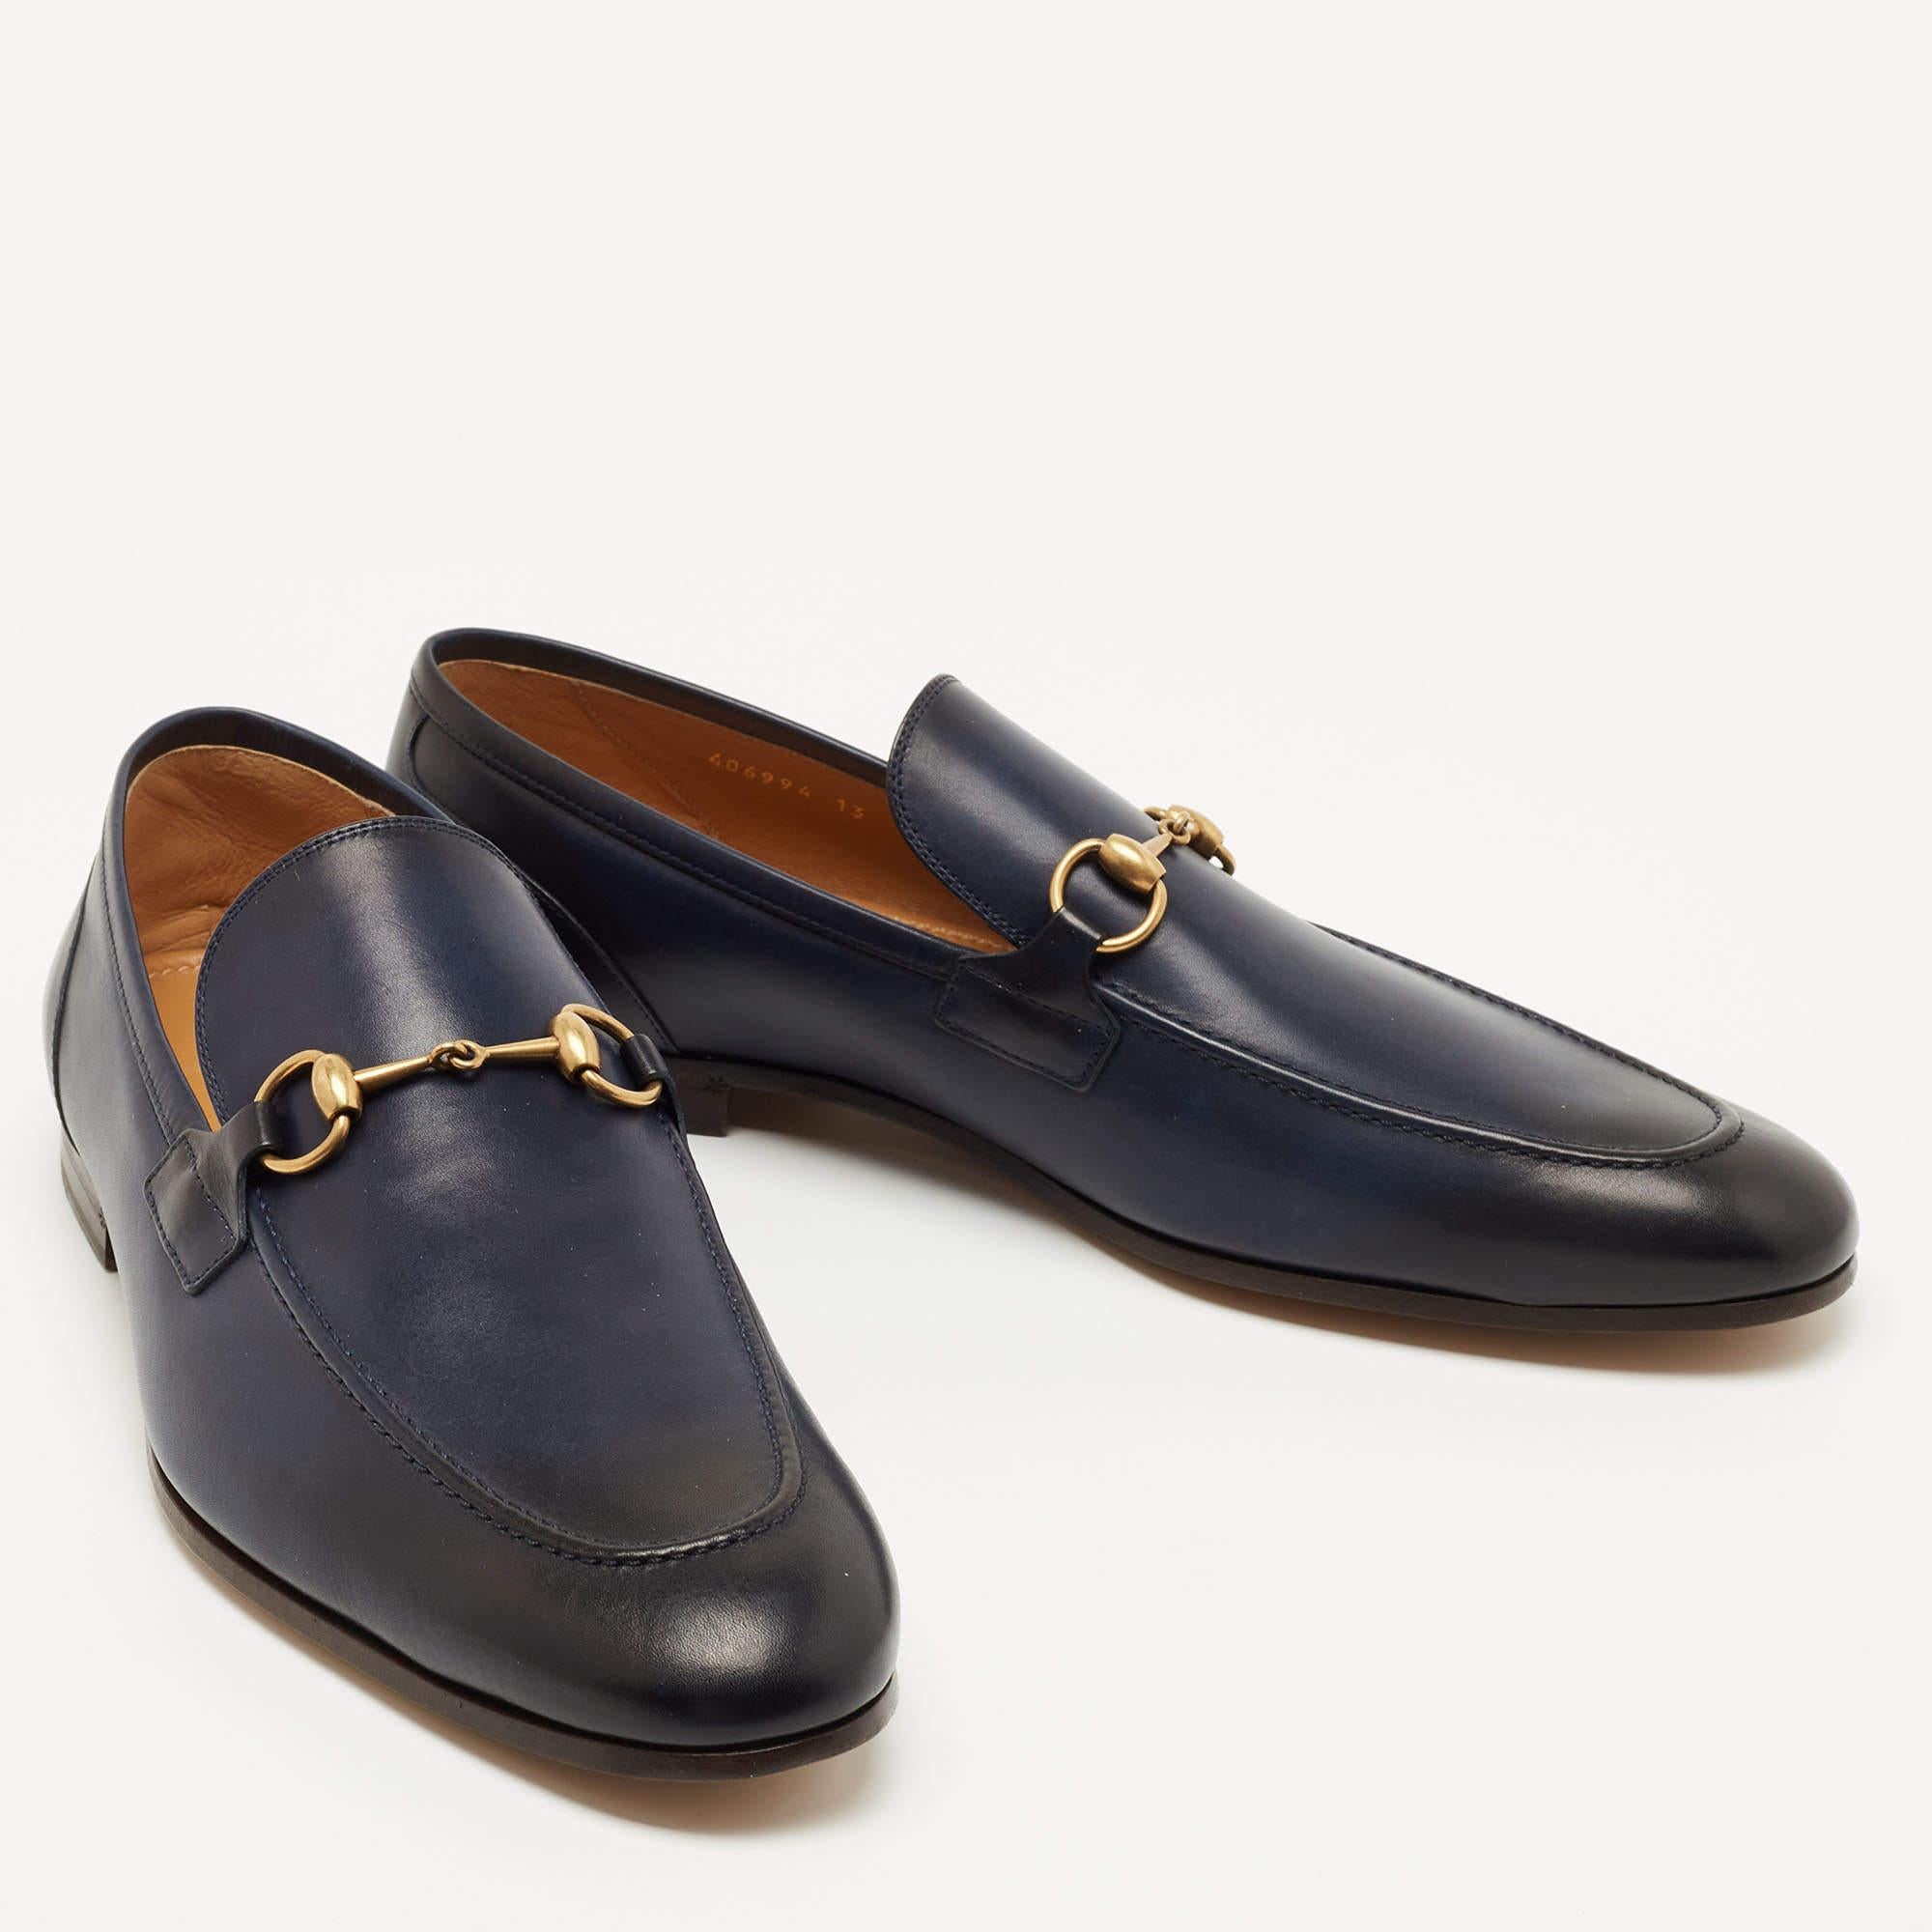 Practical, fashionable, and durable—these Gucci loafers are carefully built to be fine companions to your everyday style. They come made using the best materials to be a prized buy.

Includes
Original Box